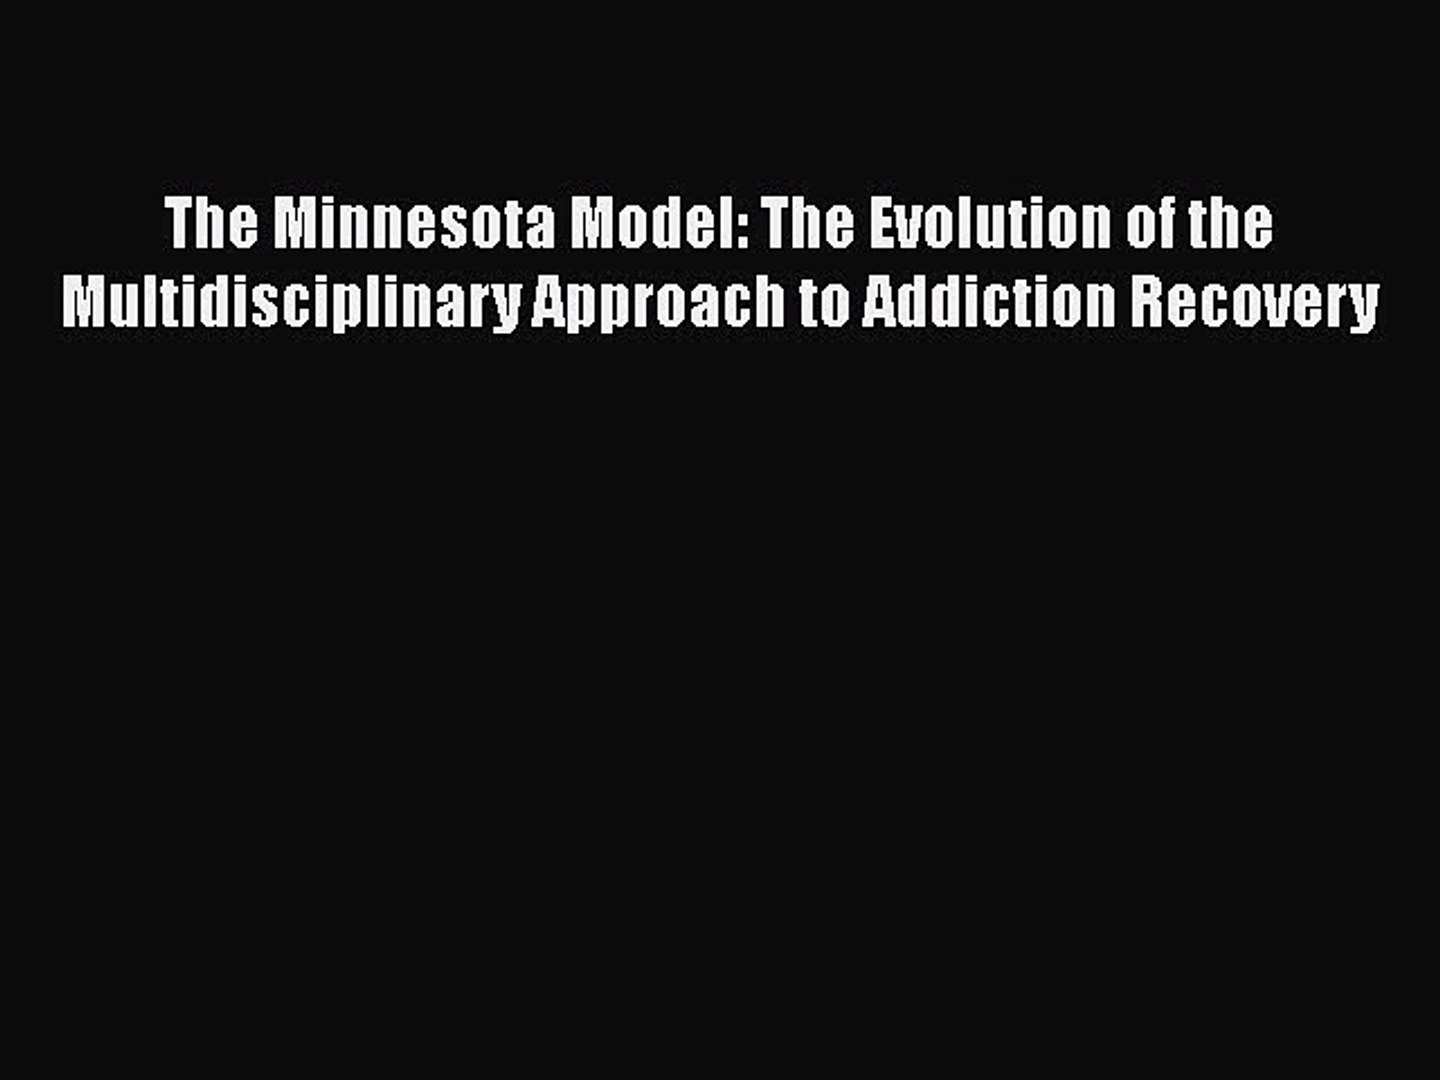 Download The Minnesota Model The Evolution Of The Multidisciplinary Approach To Addiction - 